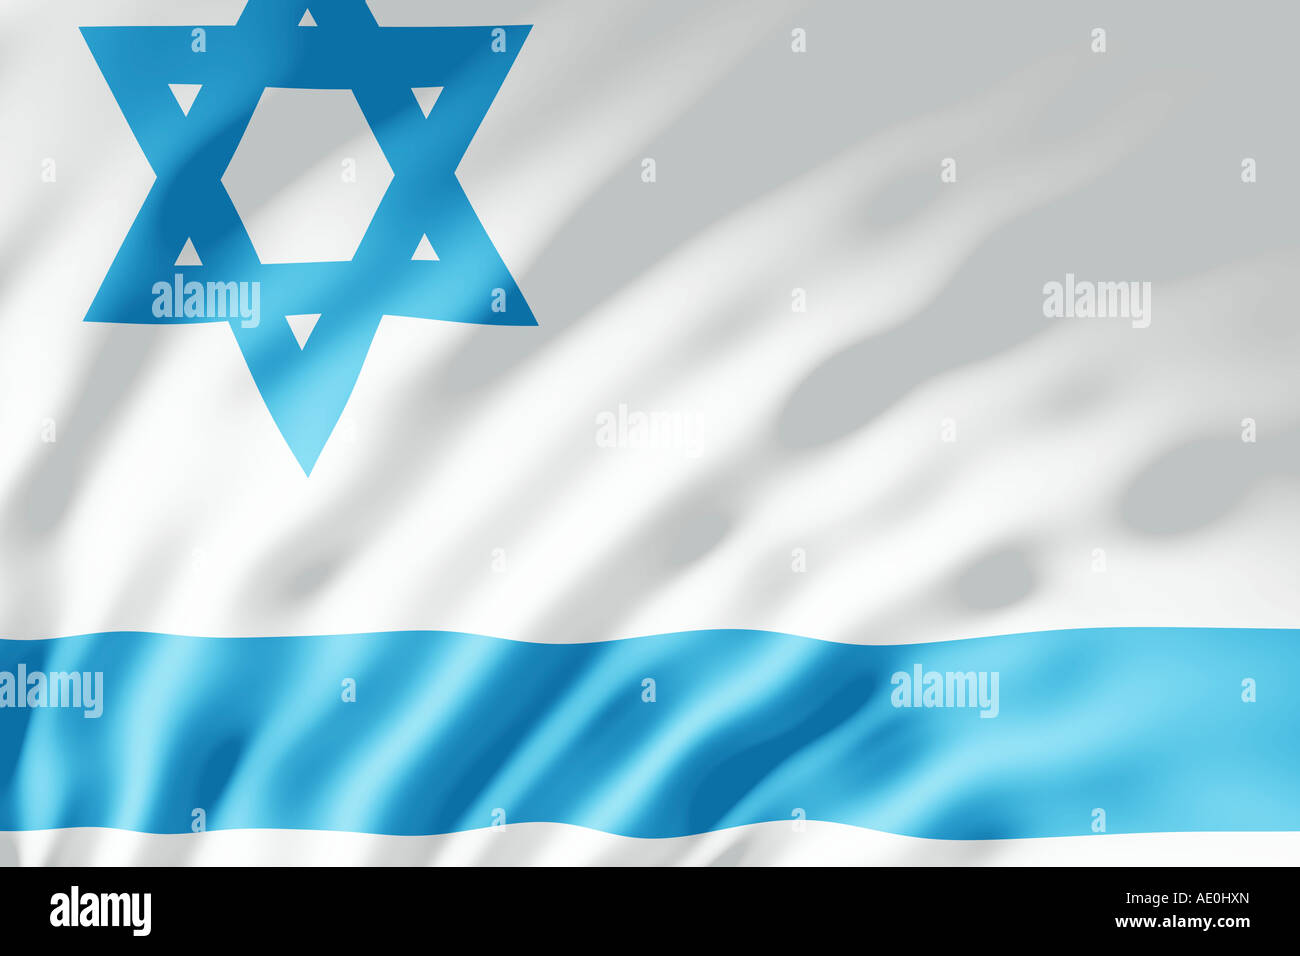 The Israel flag shown with ripples caused by the wind Stock Photo